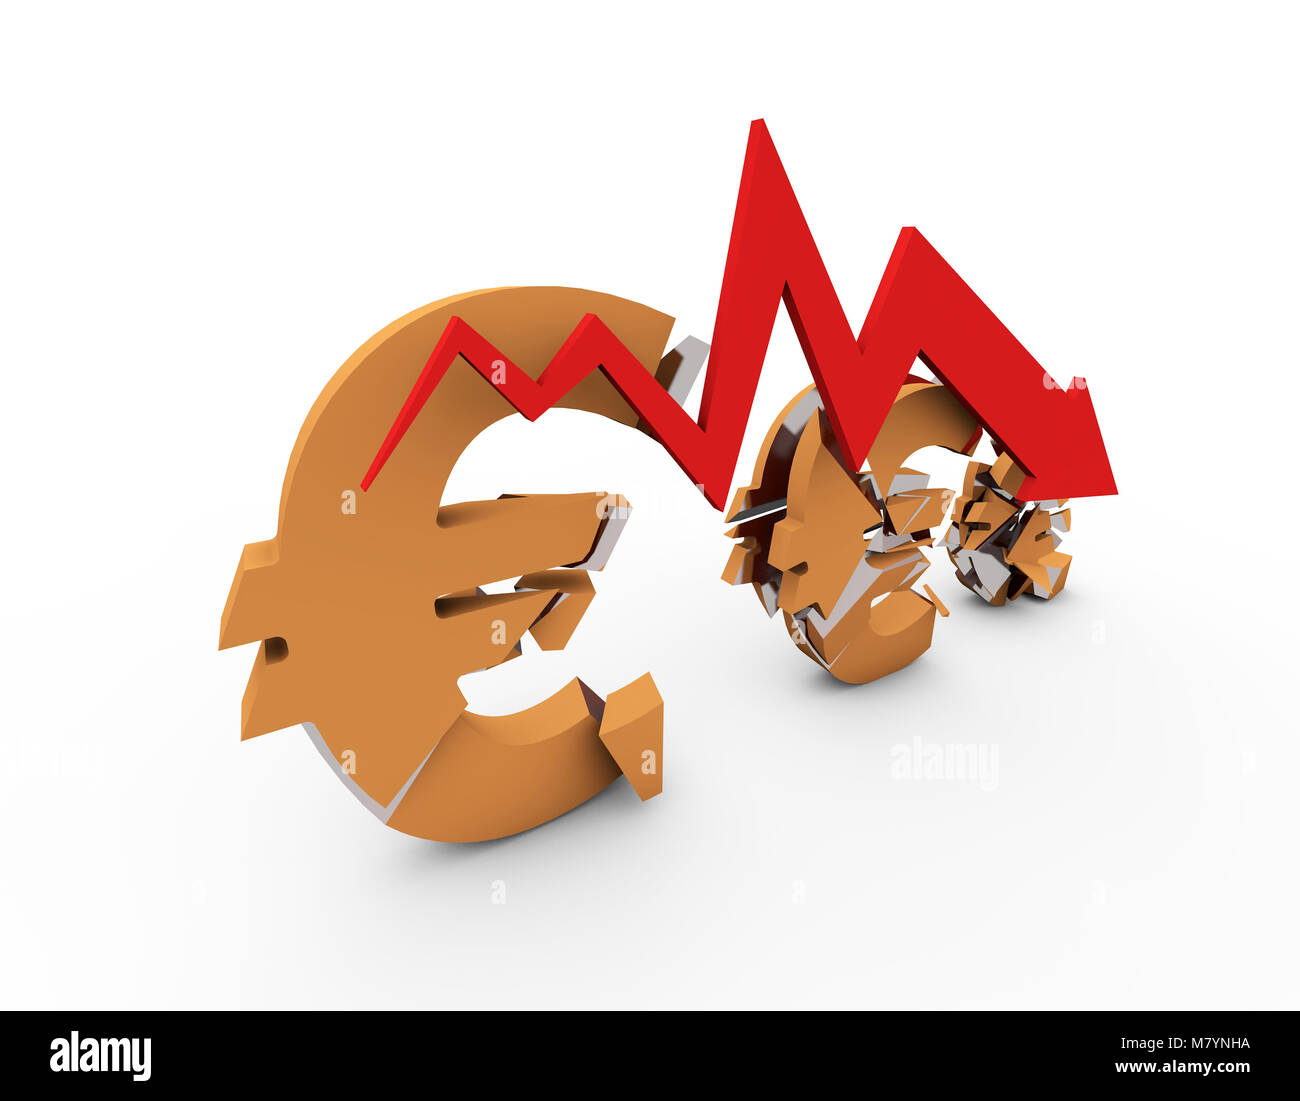 The decline of the financial economy, the devaluation of the euro, the bankruptcy of the company, failure Stock Photo